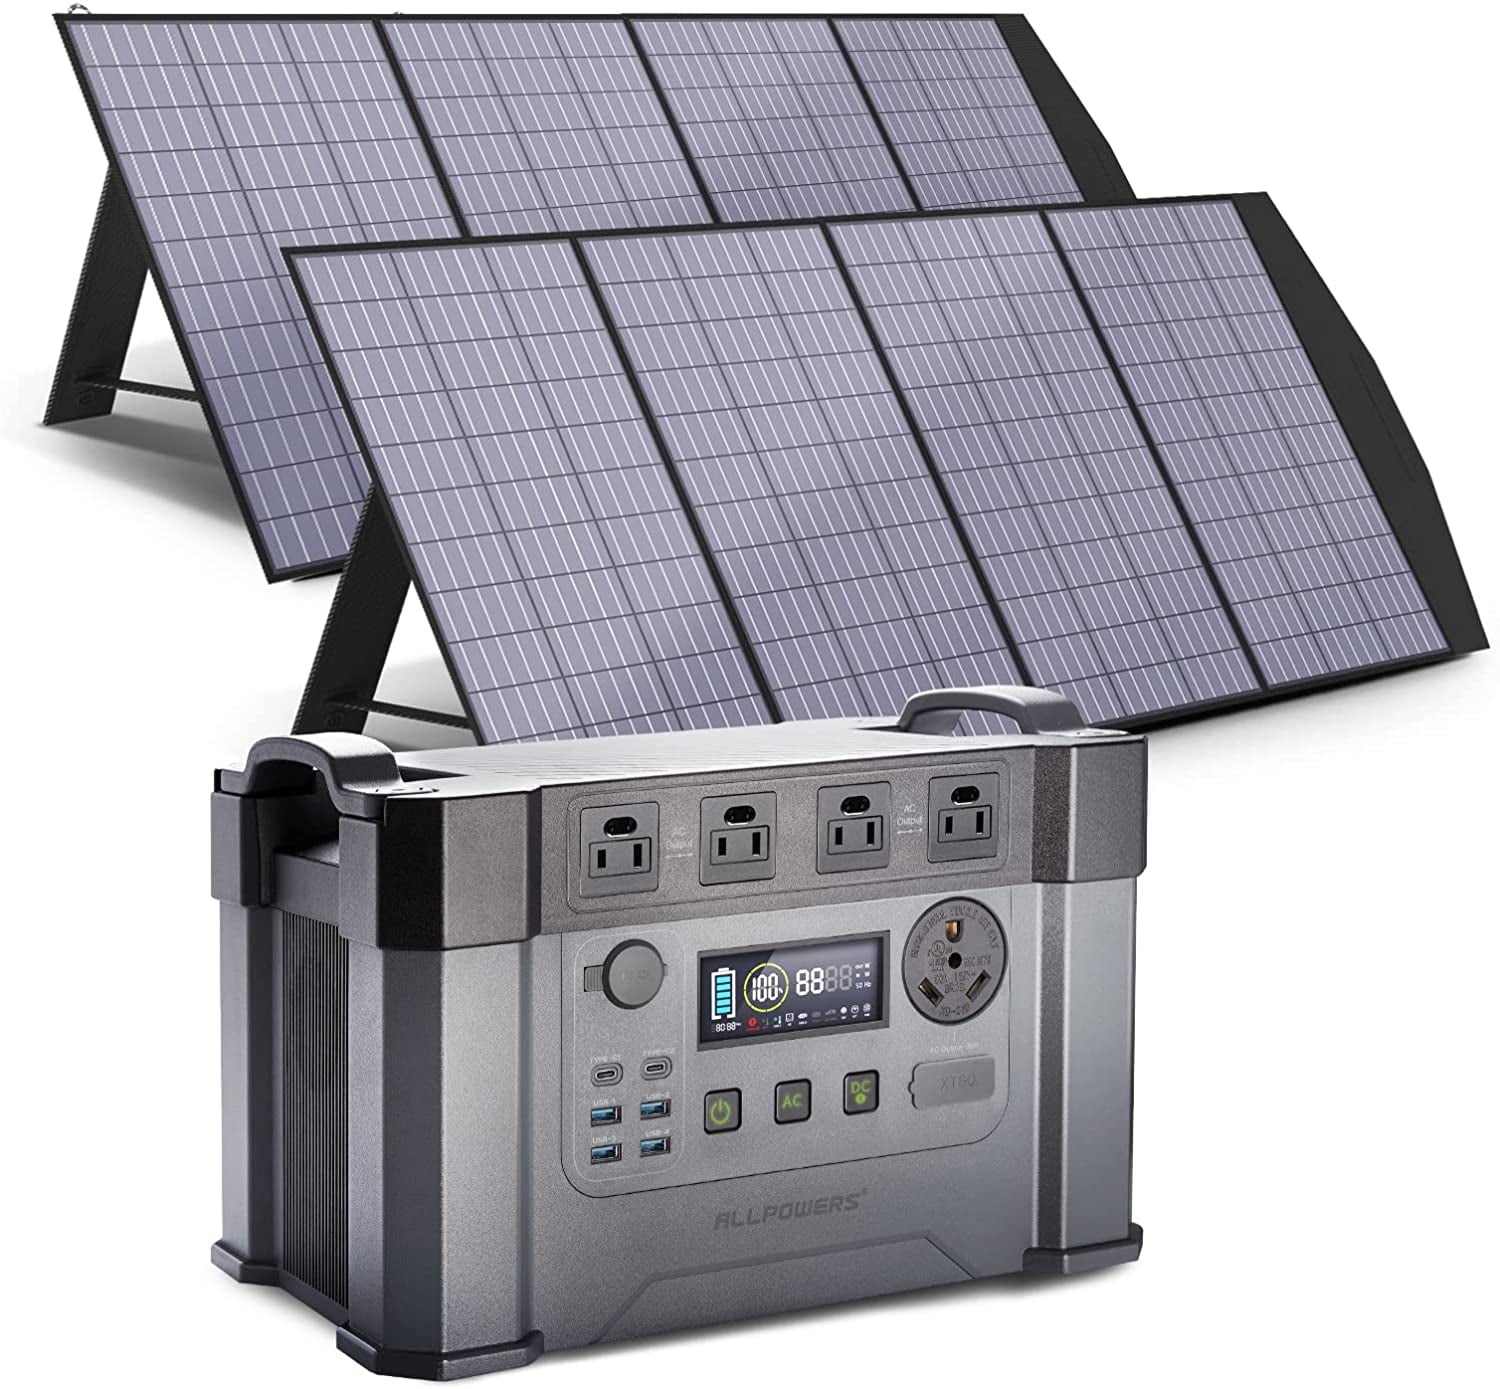 Allpowers S2000 Solar Generator Review: The Budget-Friendly